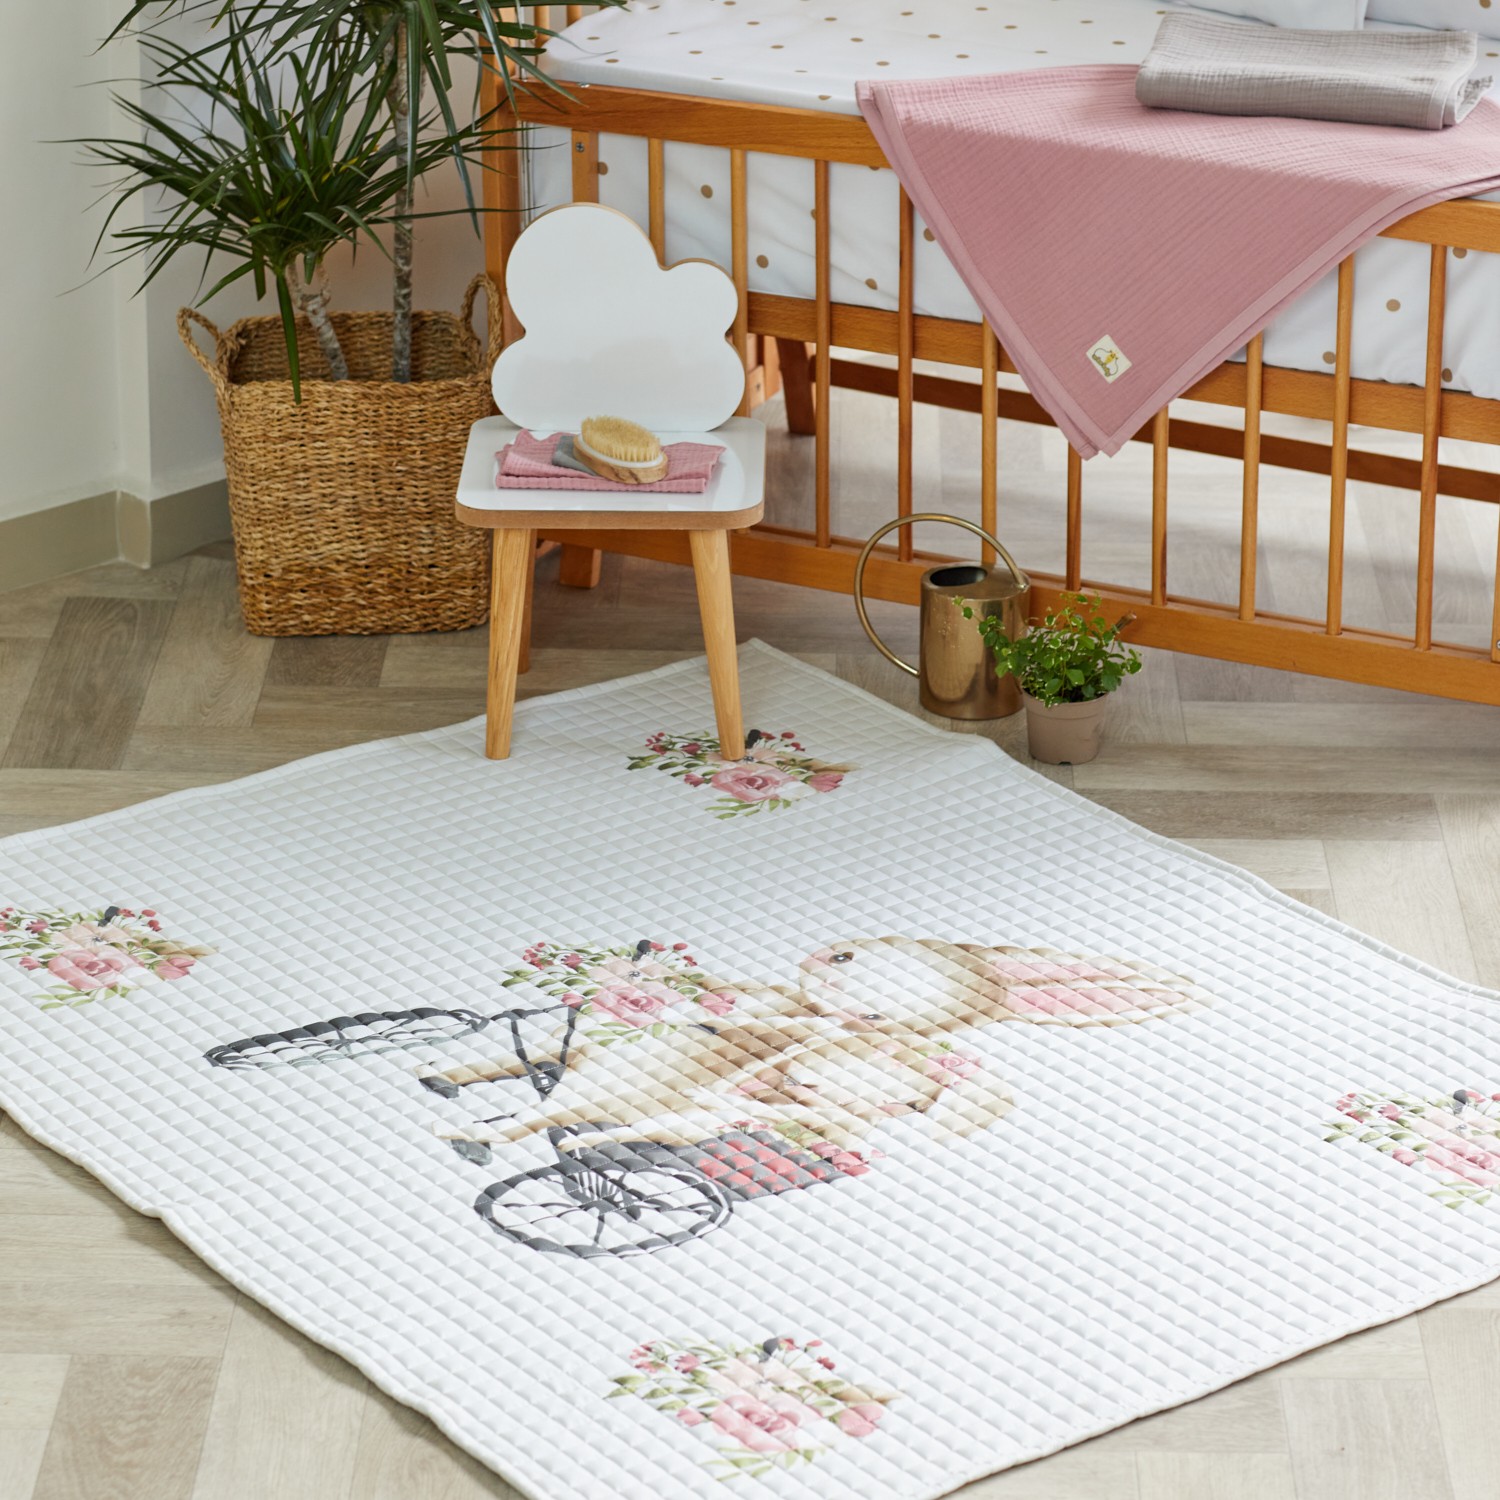 Organic Baby Play Mat - Flower And Rabbit Themed